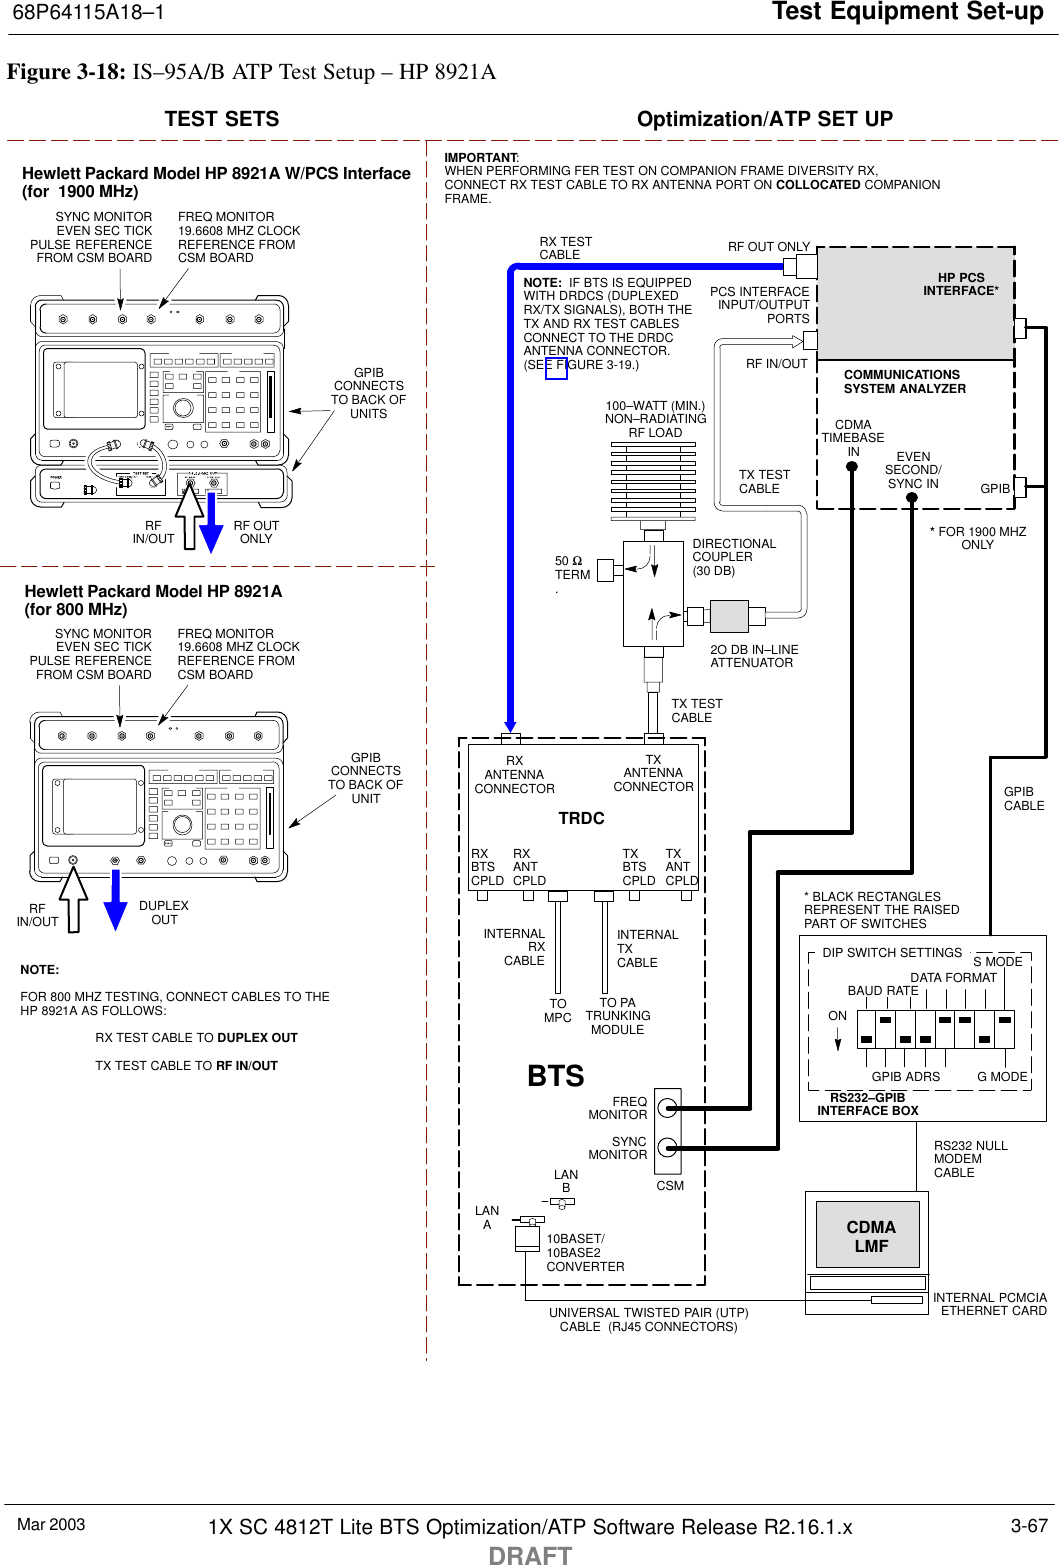 Test Equipment Set-up68P64115A18–1Mar 2003 1X SC 4812T Lite BTS Optimization/ATP Software Release R2.16.1.xDRAFT3-67Figure 3-18: IS–95A/B ATP Test Setup – HP 8921ARF OUTONLYHewlett Packard Model HP 8921A W/PCS Interface(for  1900 MHz)GPIBCONNECTSTO BACK OFUNITSSYNC MONITOREVEN SEC TICKPULSE REFERENCEFROM CSM BOARDFREQ MONITOR19.6608 MHZ CLOCKREFERENCE FROMCSM BOARDTEST SETS Optimization/ATP SET UPRFIN/OUTGPIBCONNECTSTO BACK OFUNITSYNC MONITOREVEN SEC TICKPULSE REFERENCEFROM CSM BOARDFREQ MONITOR19.6608 MHZ CLOCKREFERENCE FROMCSM BOARDHewlett Packard Model HP 8921A(for 800 MHz)RFIN/OUTDUPLEXOUTTOMPCTO PATRUNKINGMODULERS232–GPIBINTERFACE BOXINTERNAL PCMCIAETHERNET CARDGPIBCABLEUNIVERSAL TWISTED PAIR (UTP)CABLE  (RJ45 CONNECTORS)RS232 NULLMODEMCABLES MODEDATA FORMATBAUD RATEGPIB ADRS G MODEONBTSINTERNALTXCABLECDMALMFDIP SWITCH SETTINGS10BASET/10BASE2CONVERTERLANBLANARX TESTCABLEGPIBPCS INTERFACEINPUT/OUTPUTPORTSRXANTENNACONNECTORFREQMONITORSYNCMONITORCSMINTERNALRXCABLETXANTCPLDRXBTSCPLDTRDCTXBTSCPLDRXANTCPLDTXANTENNACONNECTORCOMMUNICATIONSSYSTEM ANALYZER50 ΩTERM.TX TESTCABLEDIRECTIONALCOUPLER(30 DB)100–WATT (MIN.)NON–RADIATINGRF LOADTX TESTCABLE* BLACK RECTANGLESREPRESENT THE RAISEDPART OF SWITCHESCDMATIMEBASEIN EVENSECOND/SYNC INNOTE:  IF BTS IS EQUIPPEDWITH DRDCS (DUPLEXEDRX/TX SIGNALS), BOTH THETX AND RX TEST CABLESCONNECT TO THE DRDCANTENNA CONNECTOR.(SEE FIGURE 3-19.)HP PCSINTERFACE*2O DB IN–LINEATTENUATOR* FOR 1900 MHZONLYRF OUT ONLYRF IN/OUTNOTE:FOR 800 MHZ TESTING, CONNECT CABLES TO THEHP 8921A AS FOLLOWS:RX TEST CABLE TO DUPLEX OUTTX TEST CABLE TO RF IN/OUTIMPORTANT:WHEN PERFORMING FER TEST ON COMPANION FRAME DIVERSITY RX,CONNECT RX TEST CABLE TO RX ANTENNA PORT ON COLLOCATED COMPANIONFRAME.